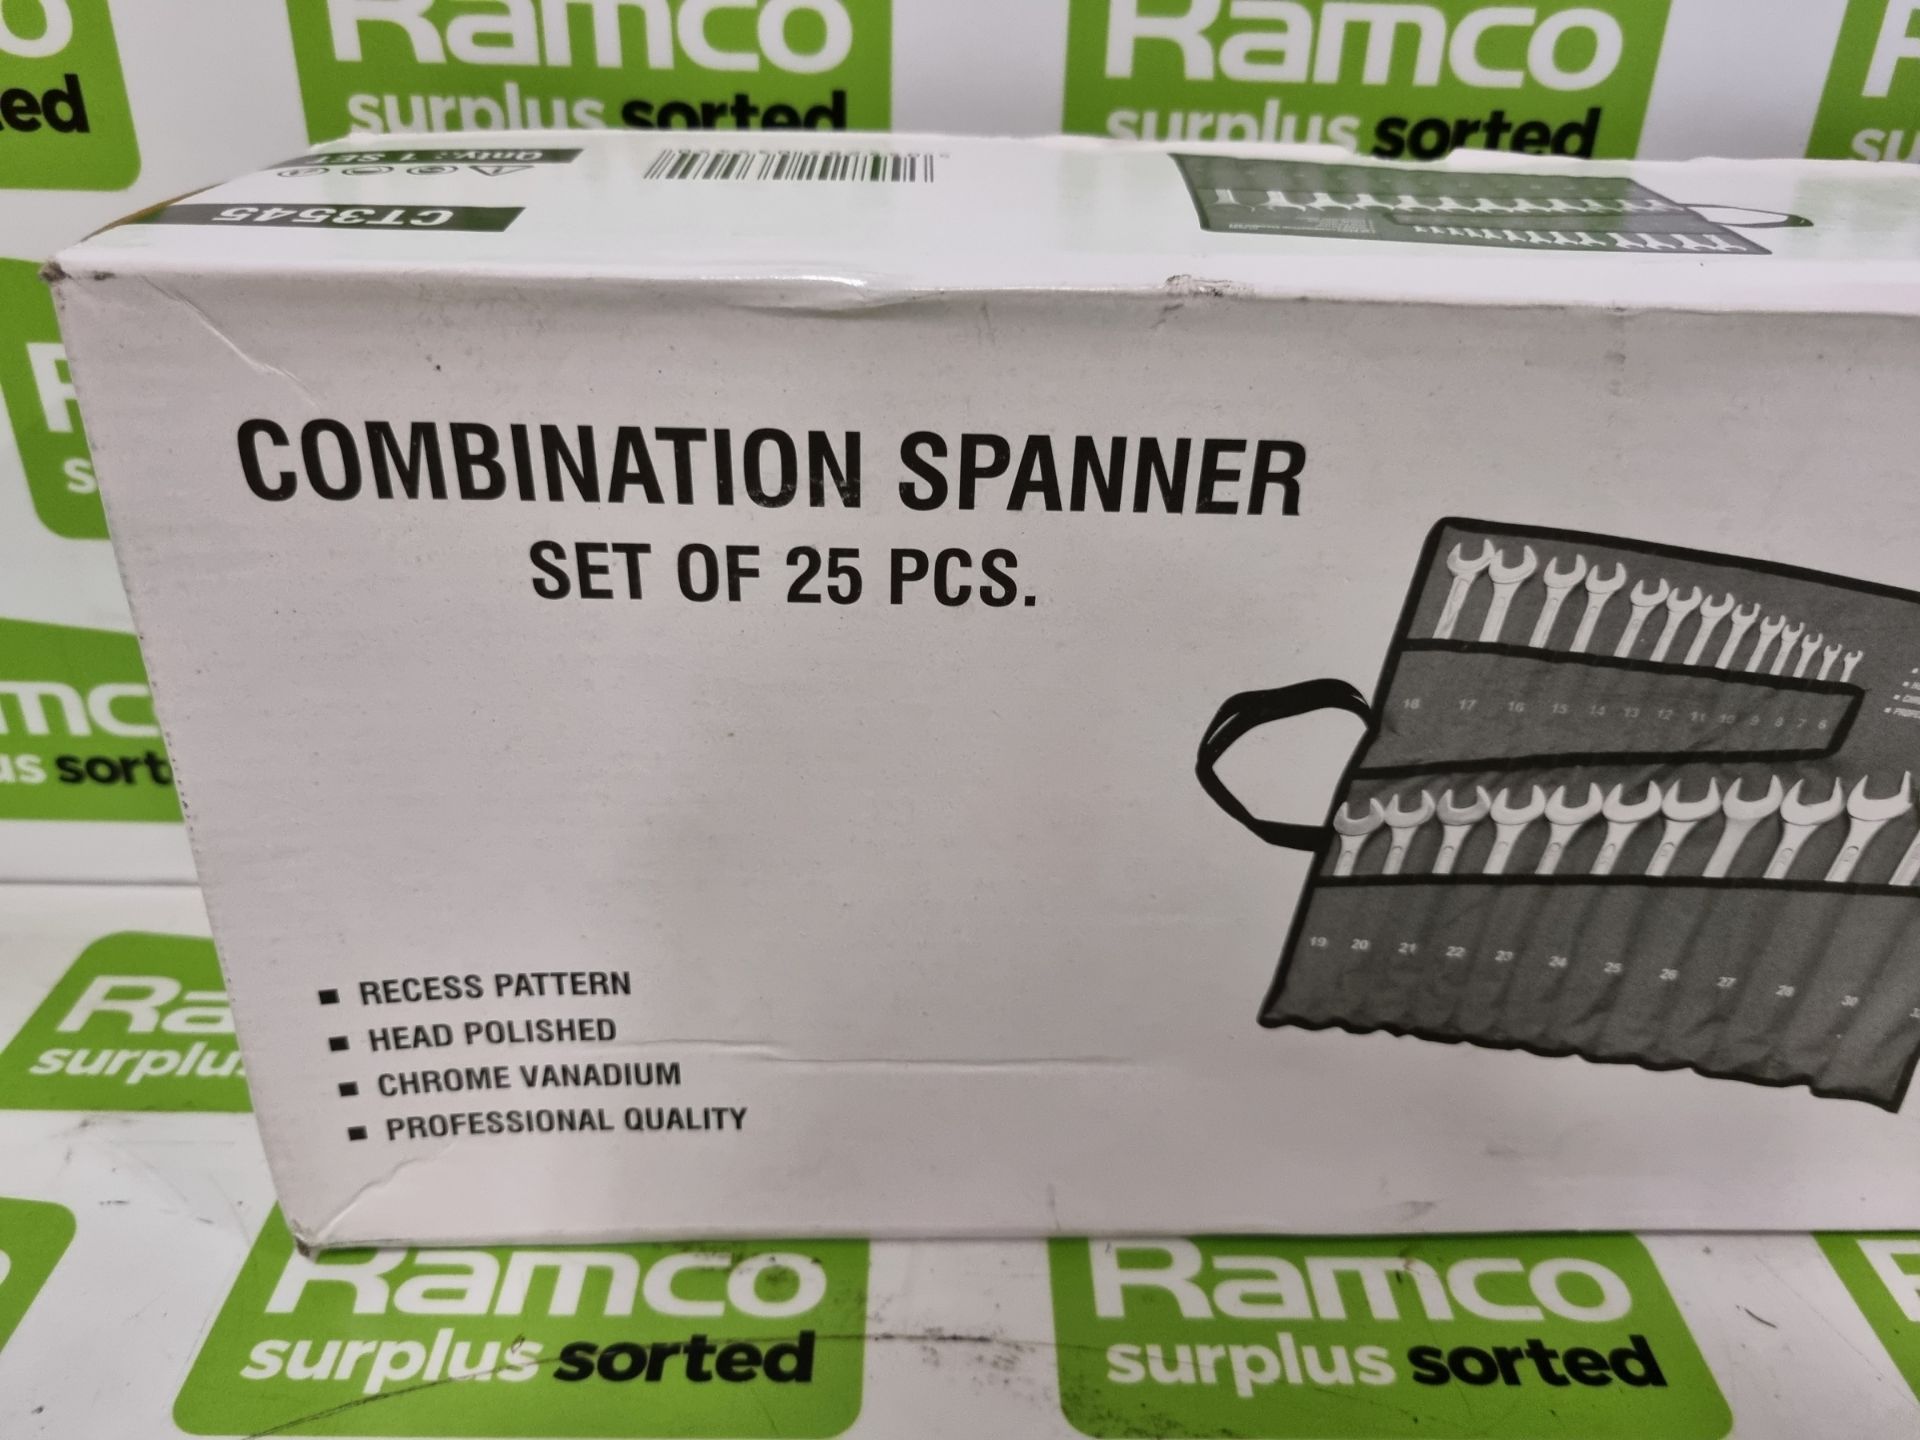 25pc combination spanner set - sizes 19-32mm - Image 2 of 4